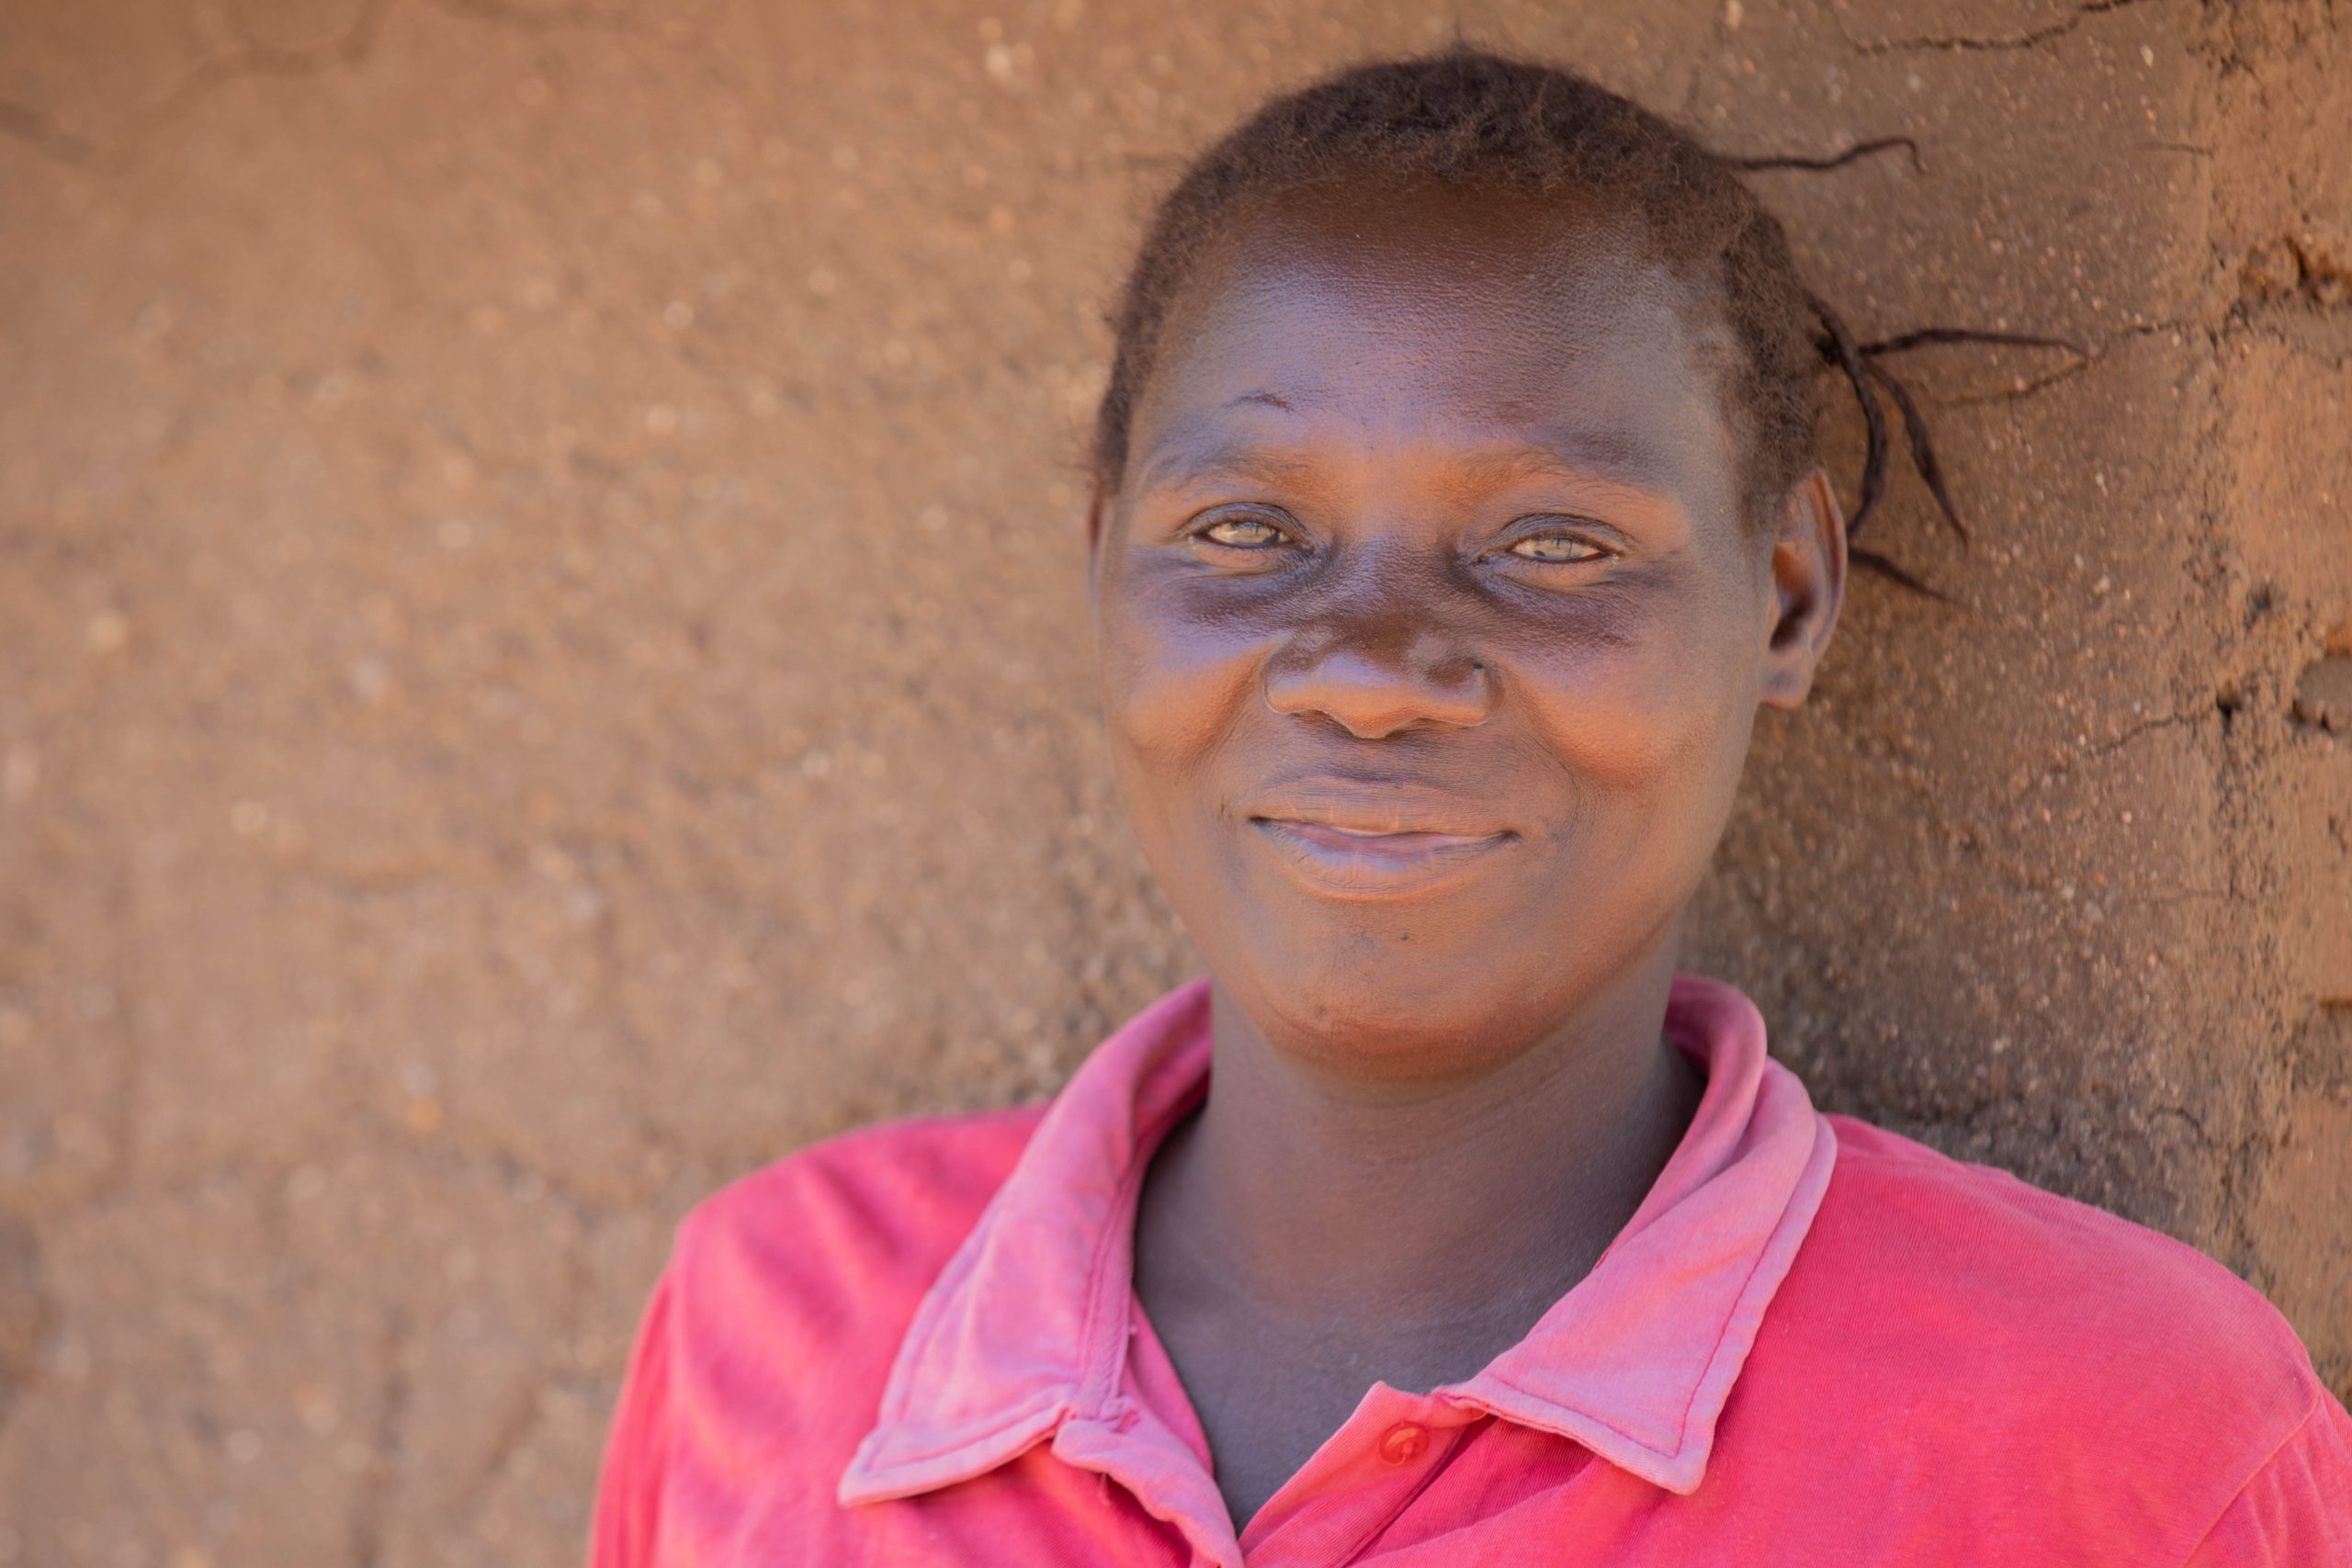 Sightsavers helped Esther get cataract surgery in Malawi